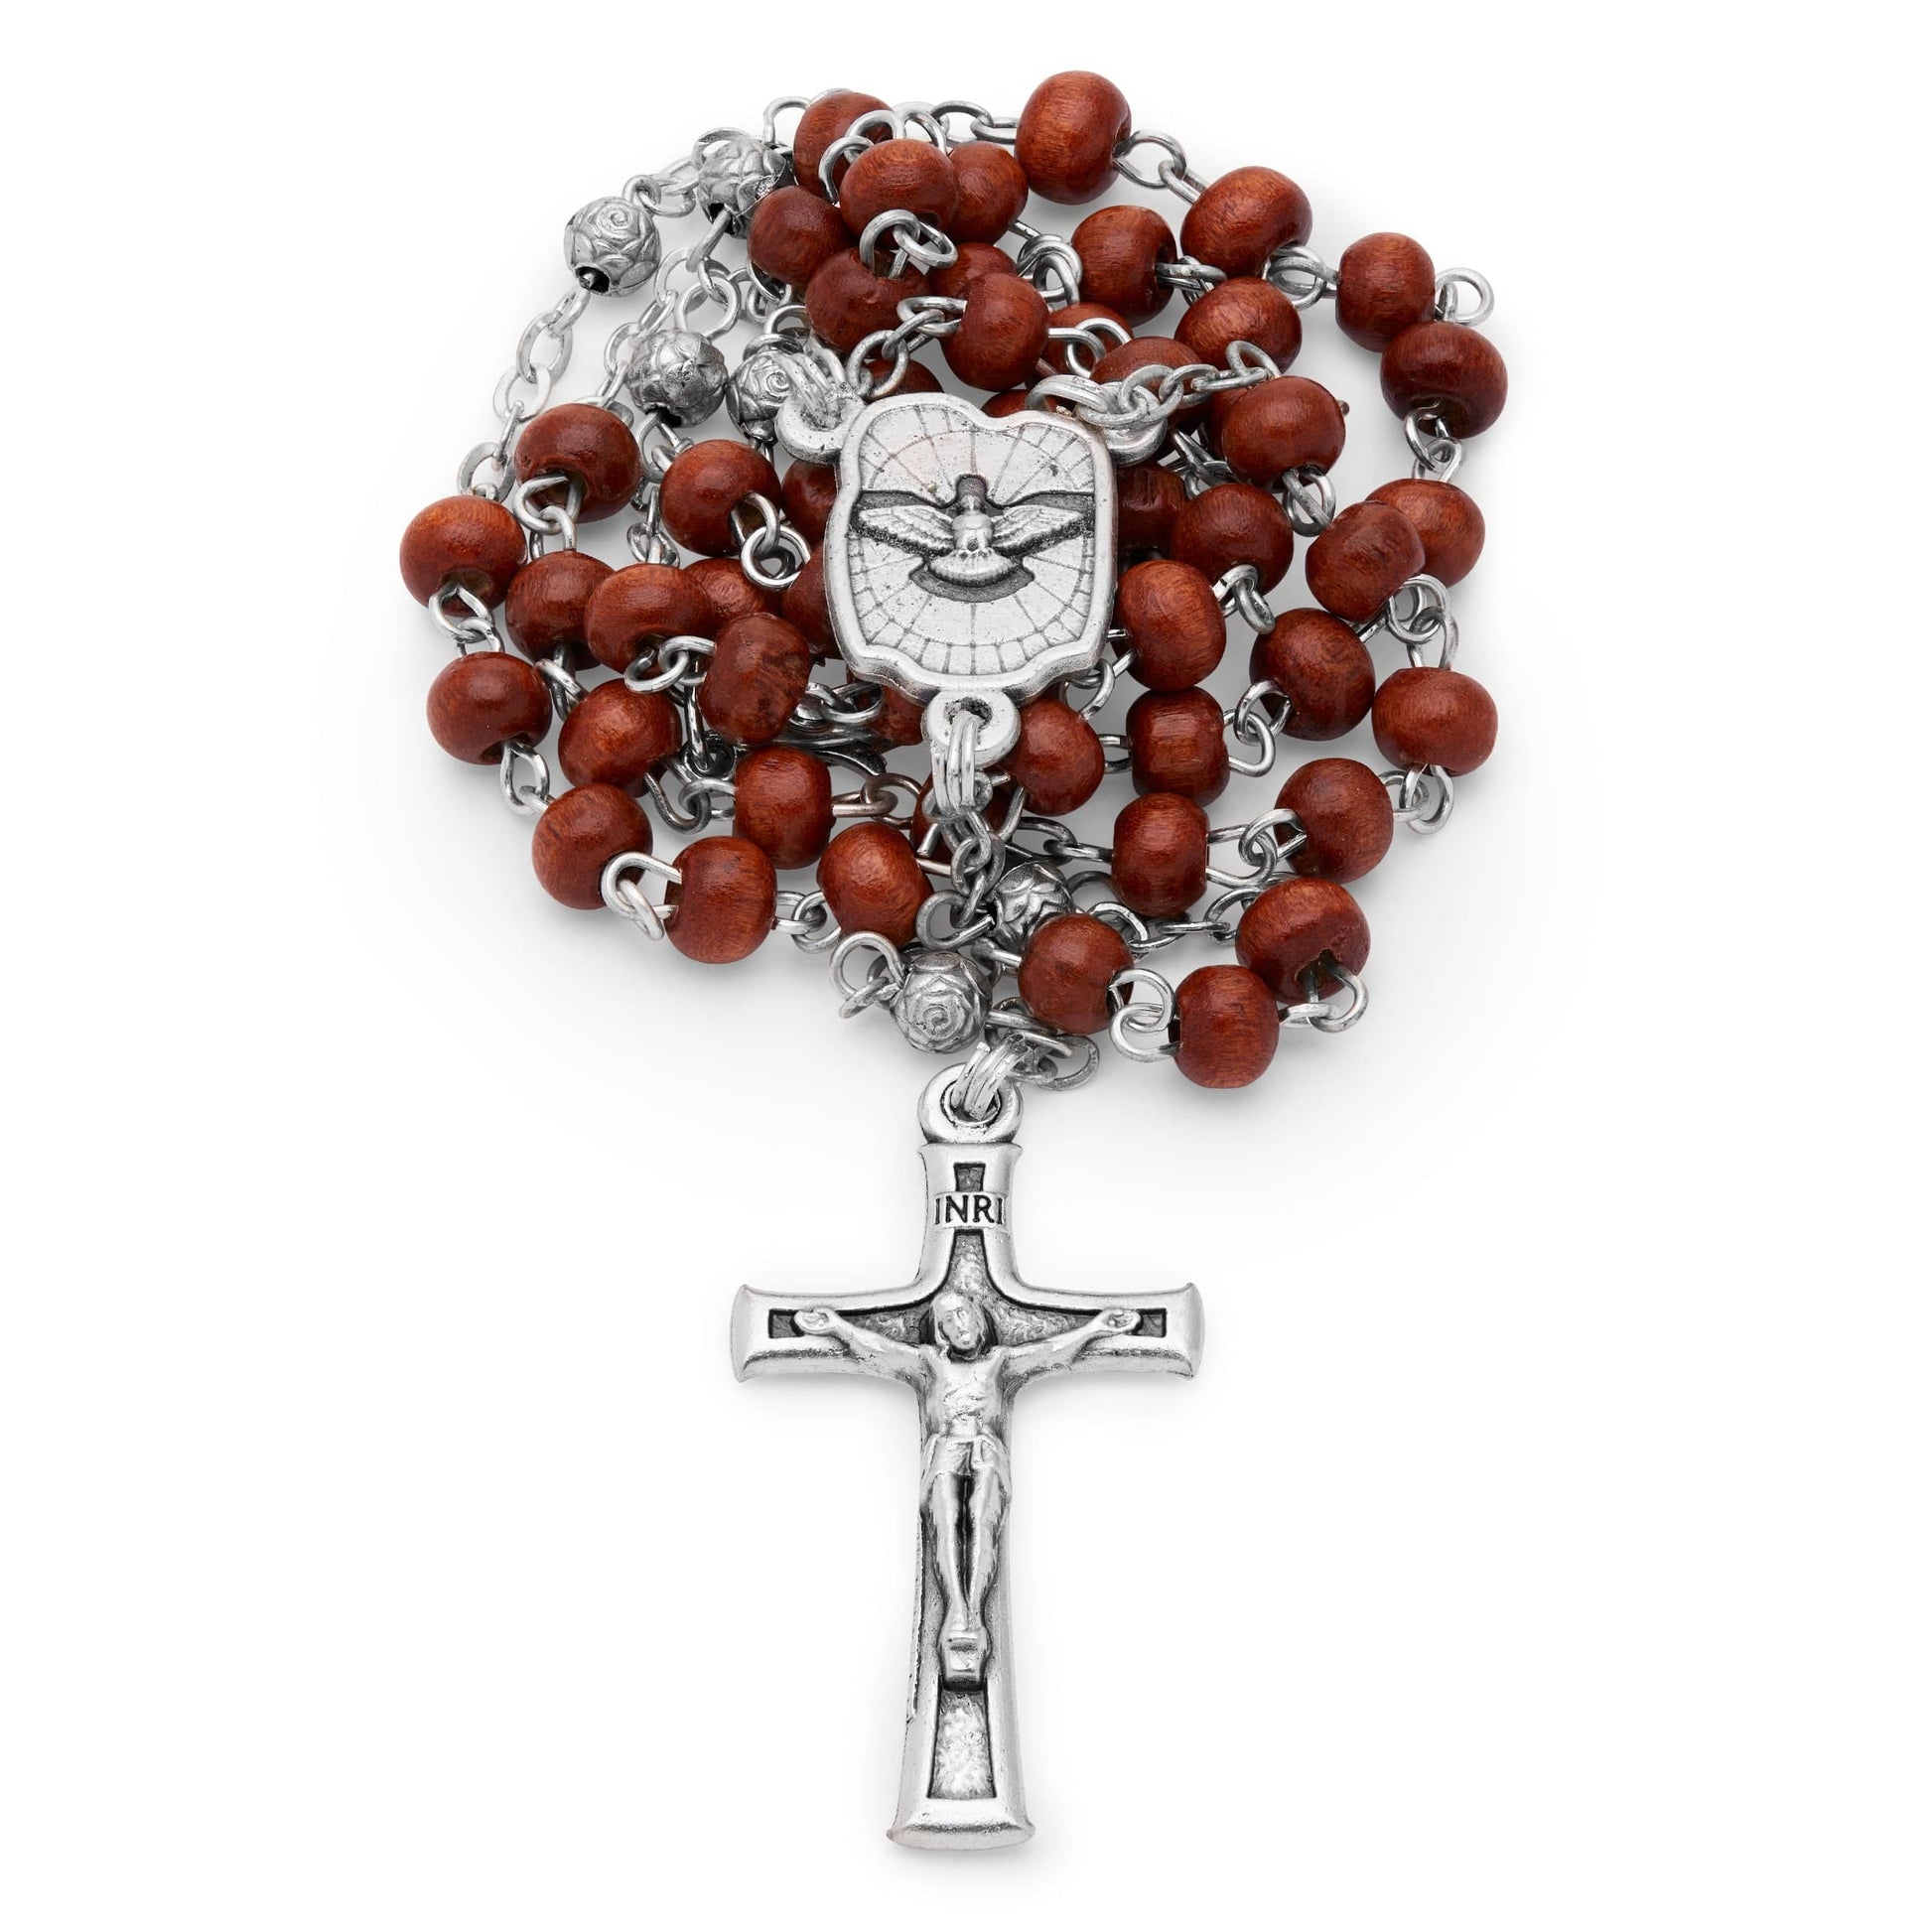 MONDO CATTOLICO Prayer Beads 38 cm (15 in) / 4 mm (0.15 in) Olive Wood Case and Wooden Rosary of the Holy Spirit